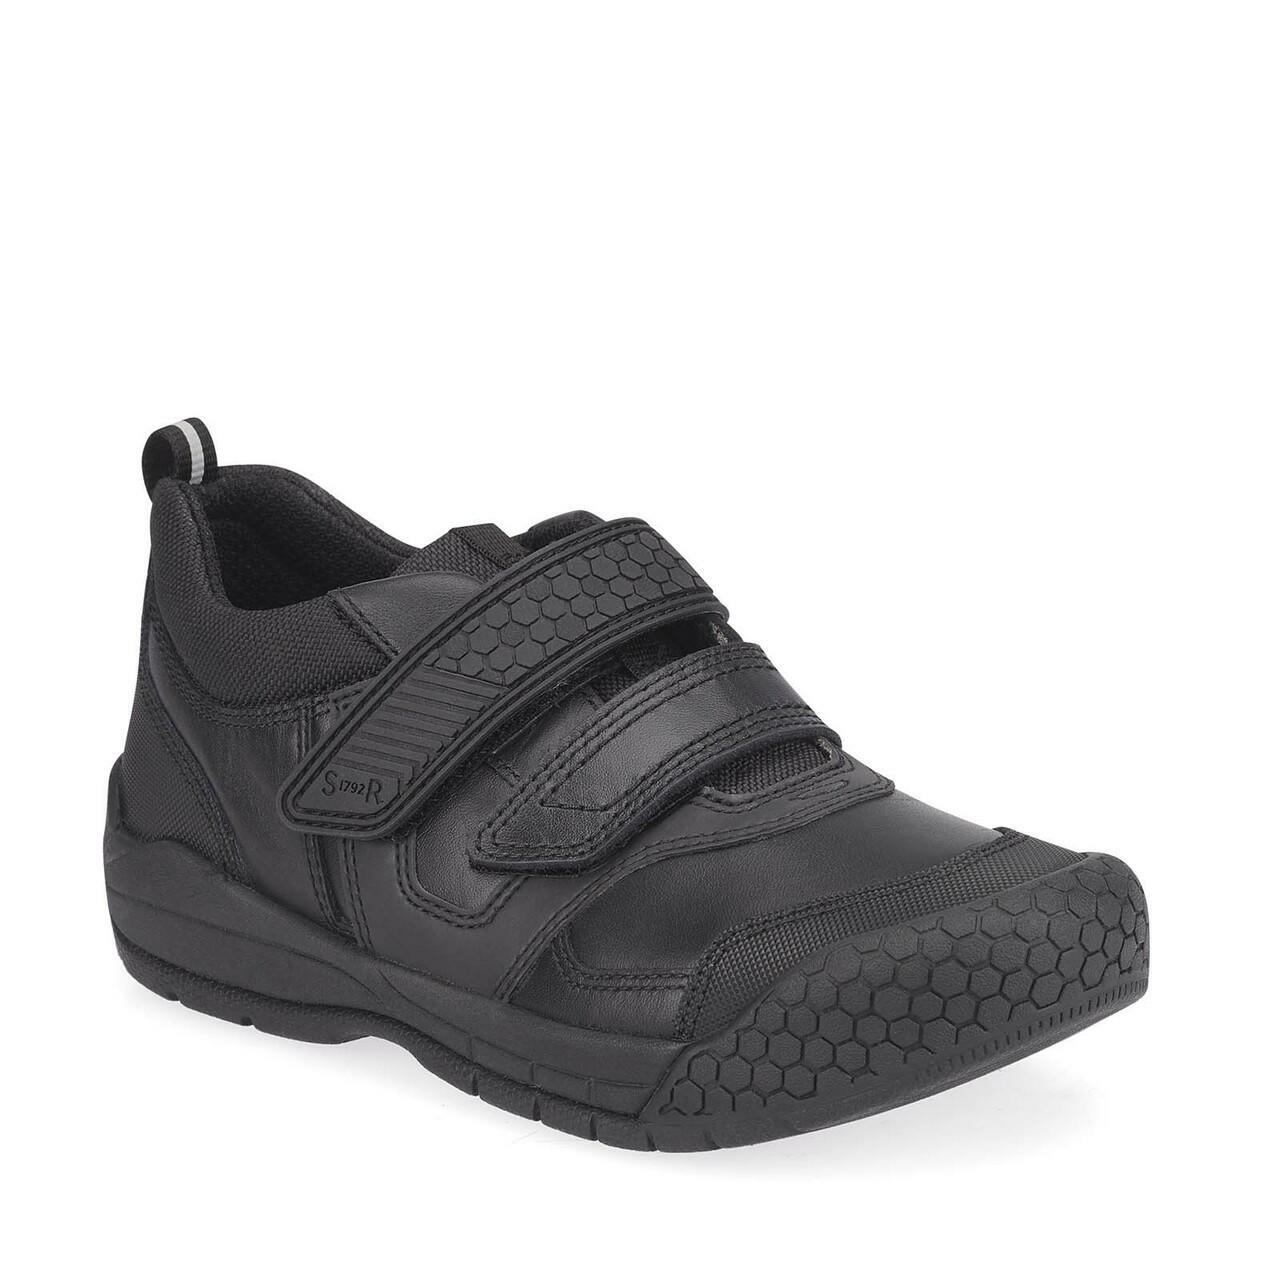 A pair of boys school shoes by Start Rite, style Strike, in black leather with double velcro fastening. Angled view.